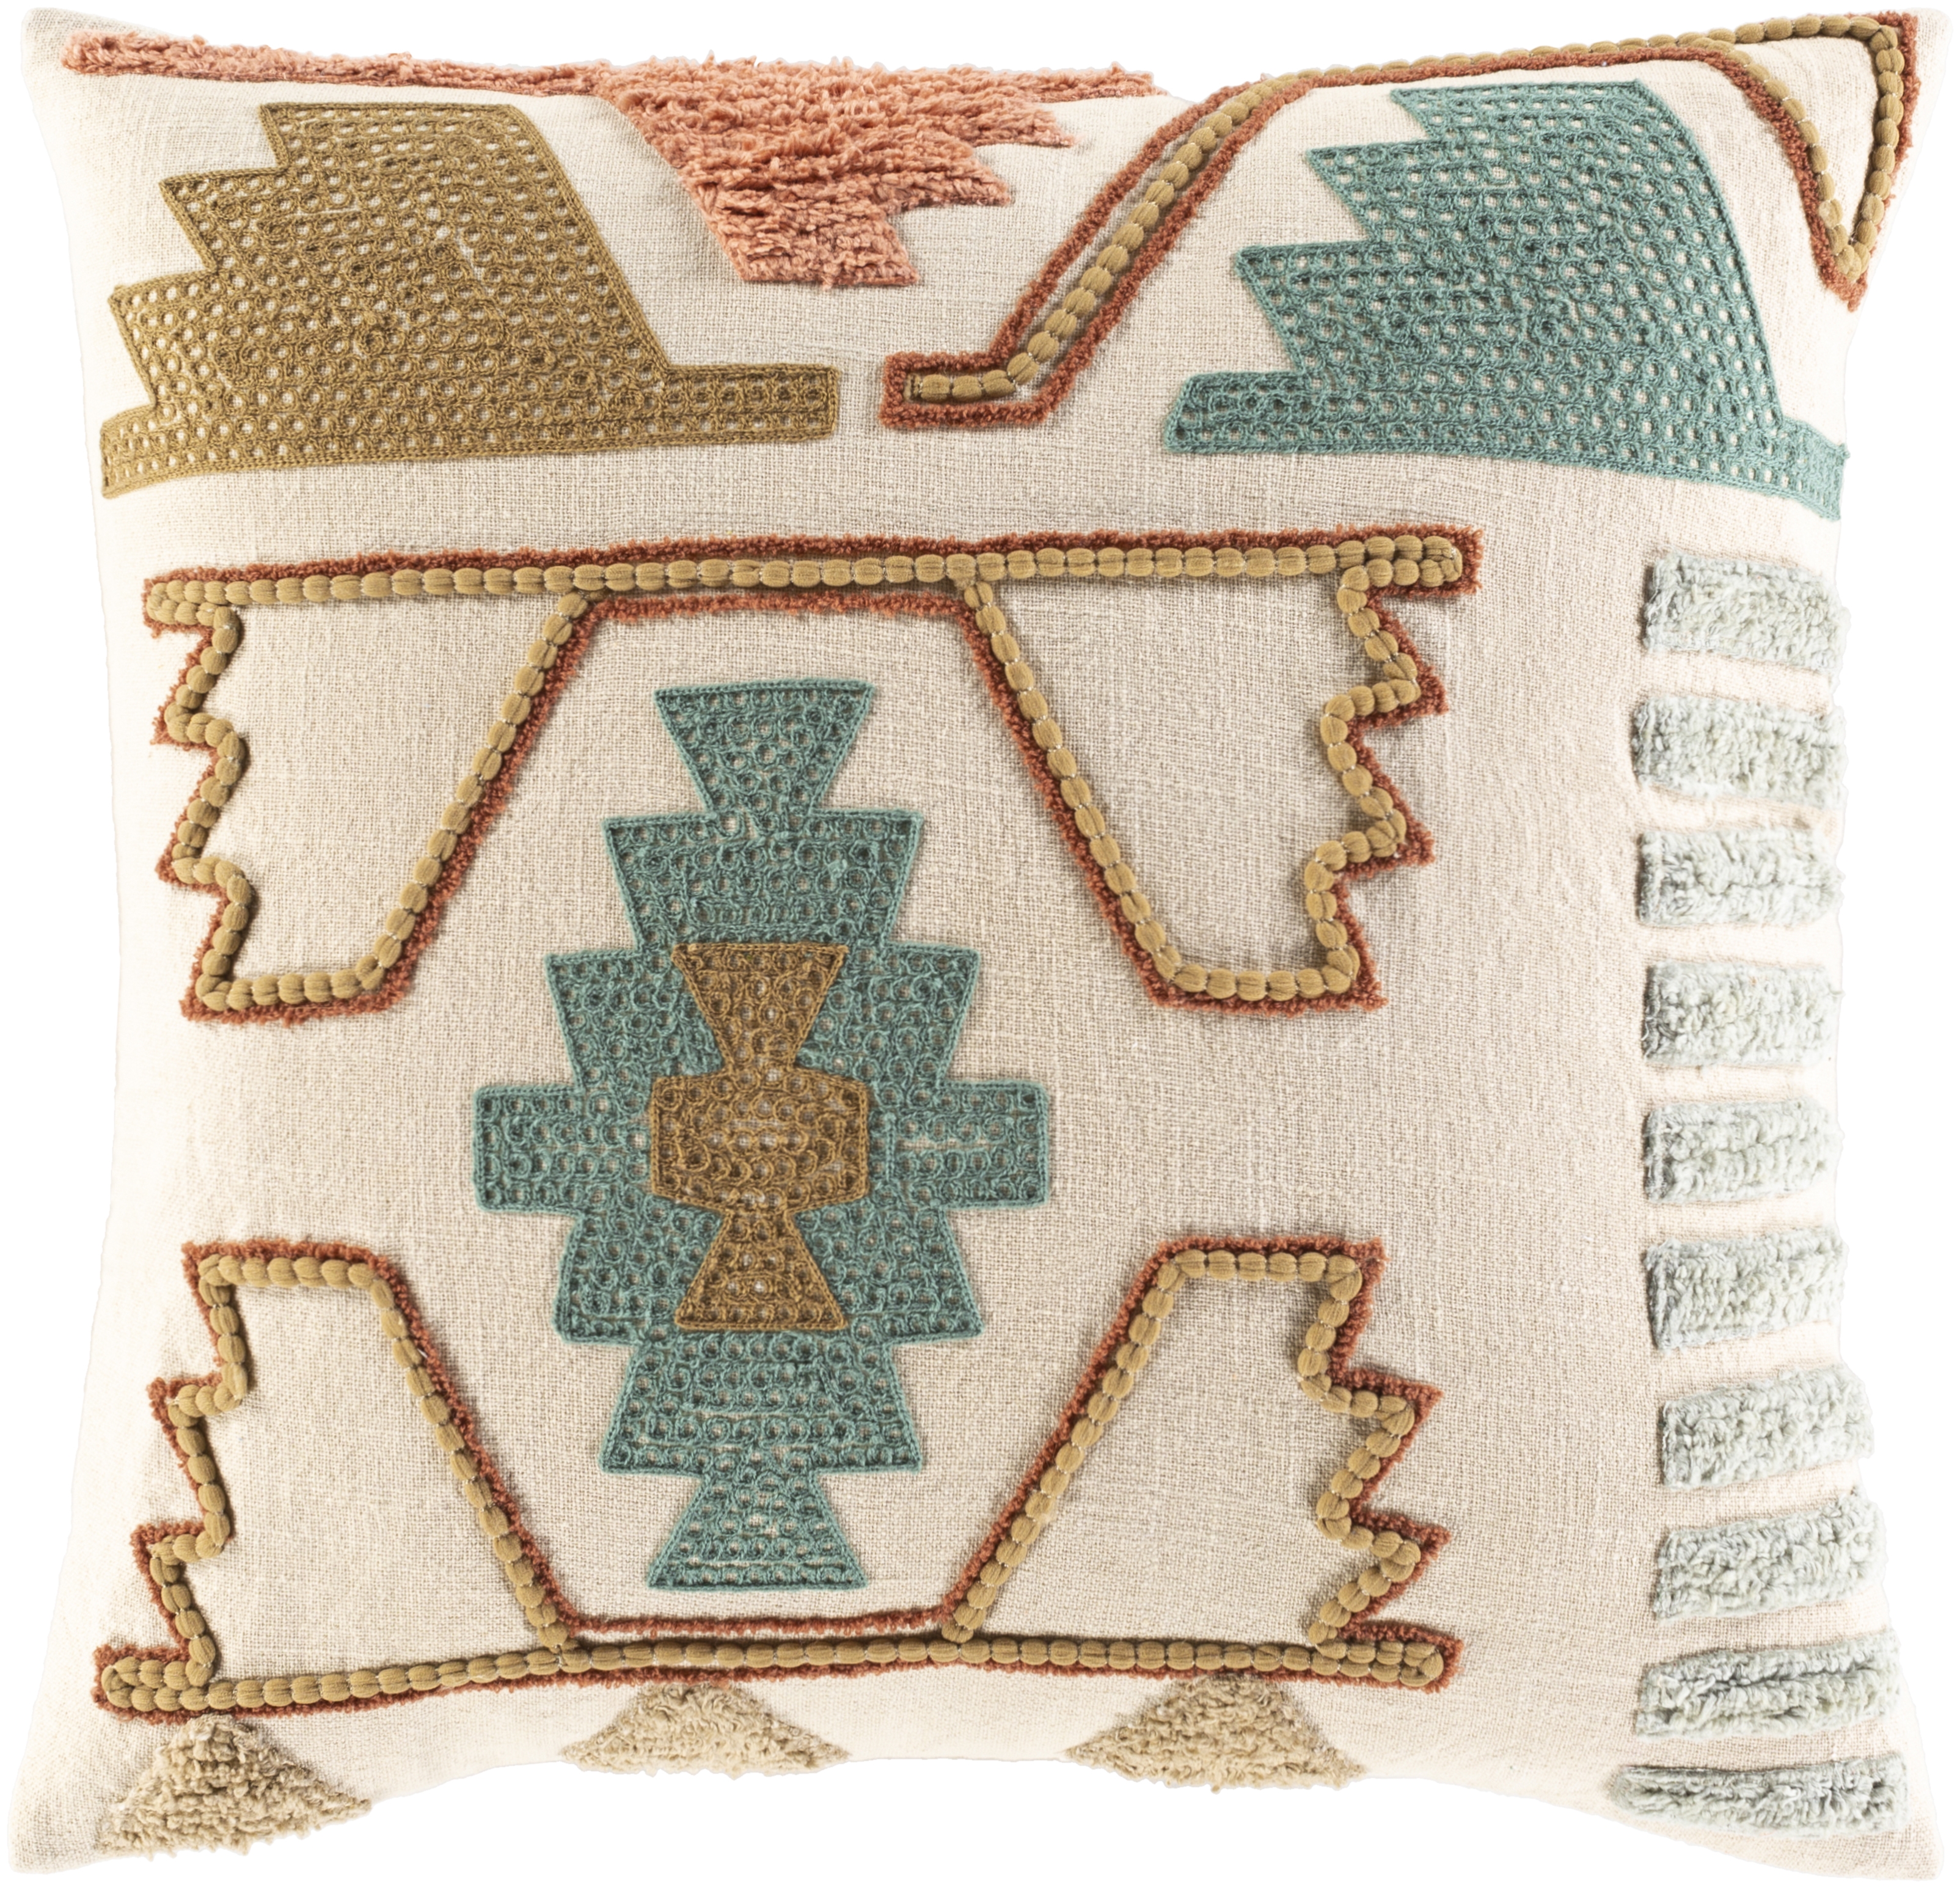 Bisbee II Throw Pillow, 18" x 18", pillow cover only - Image 0